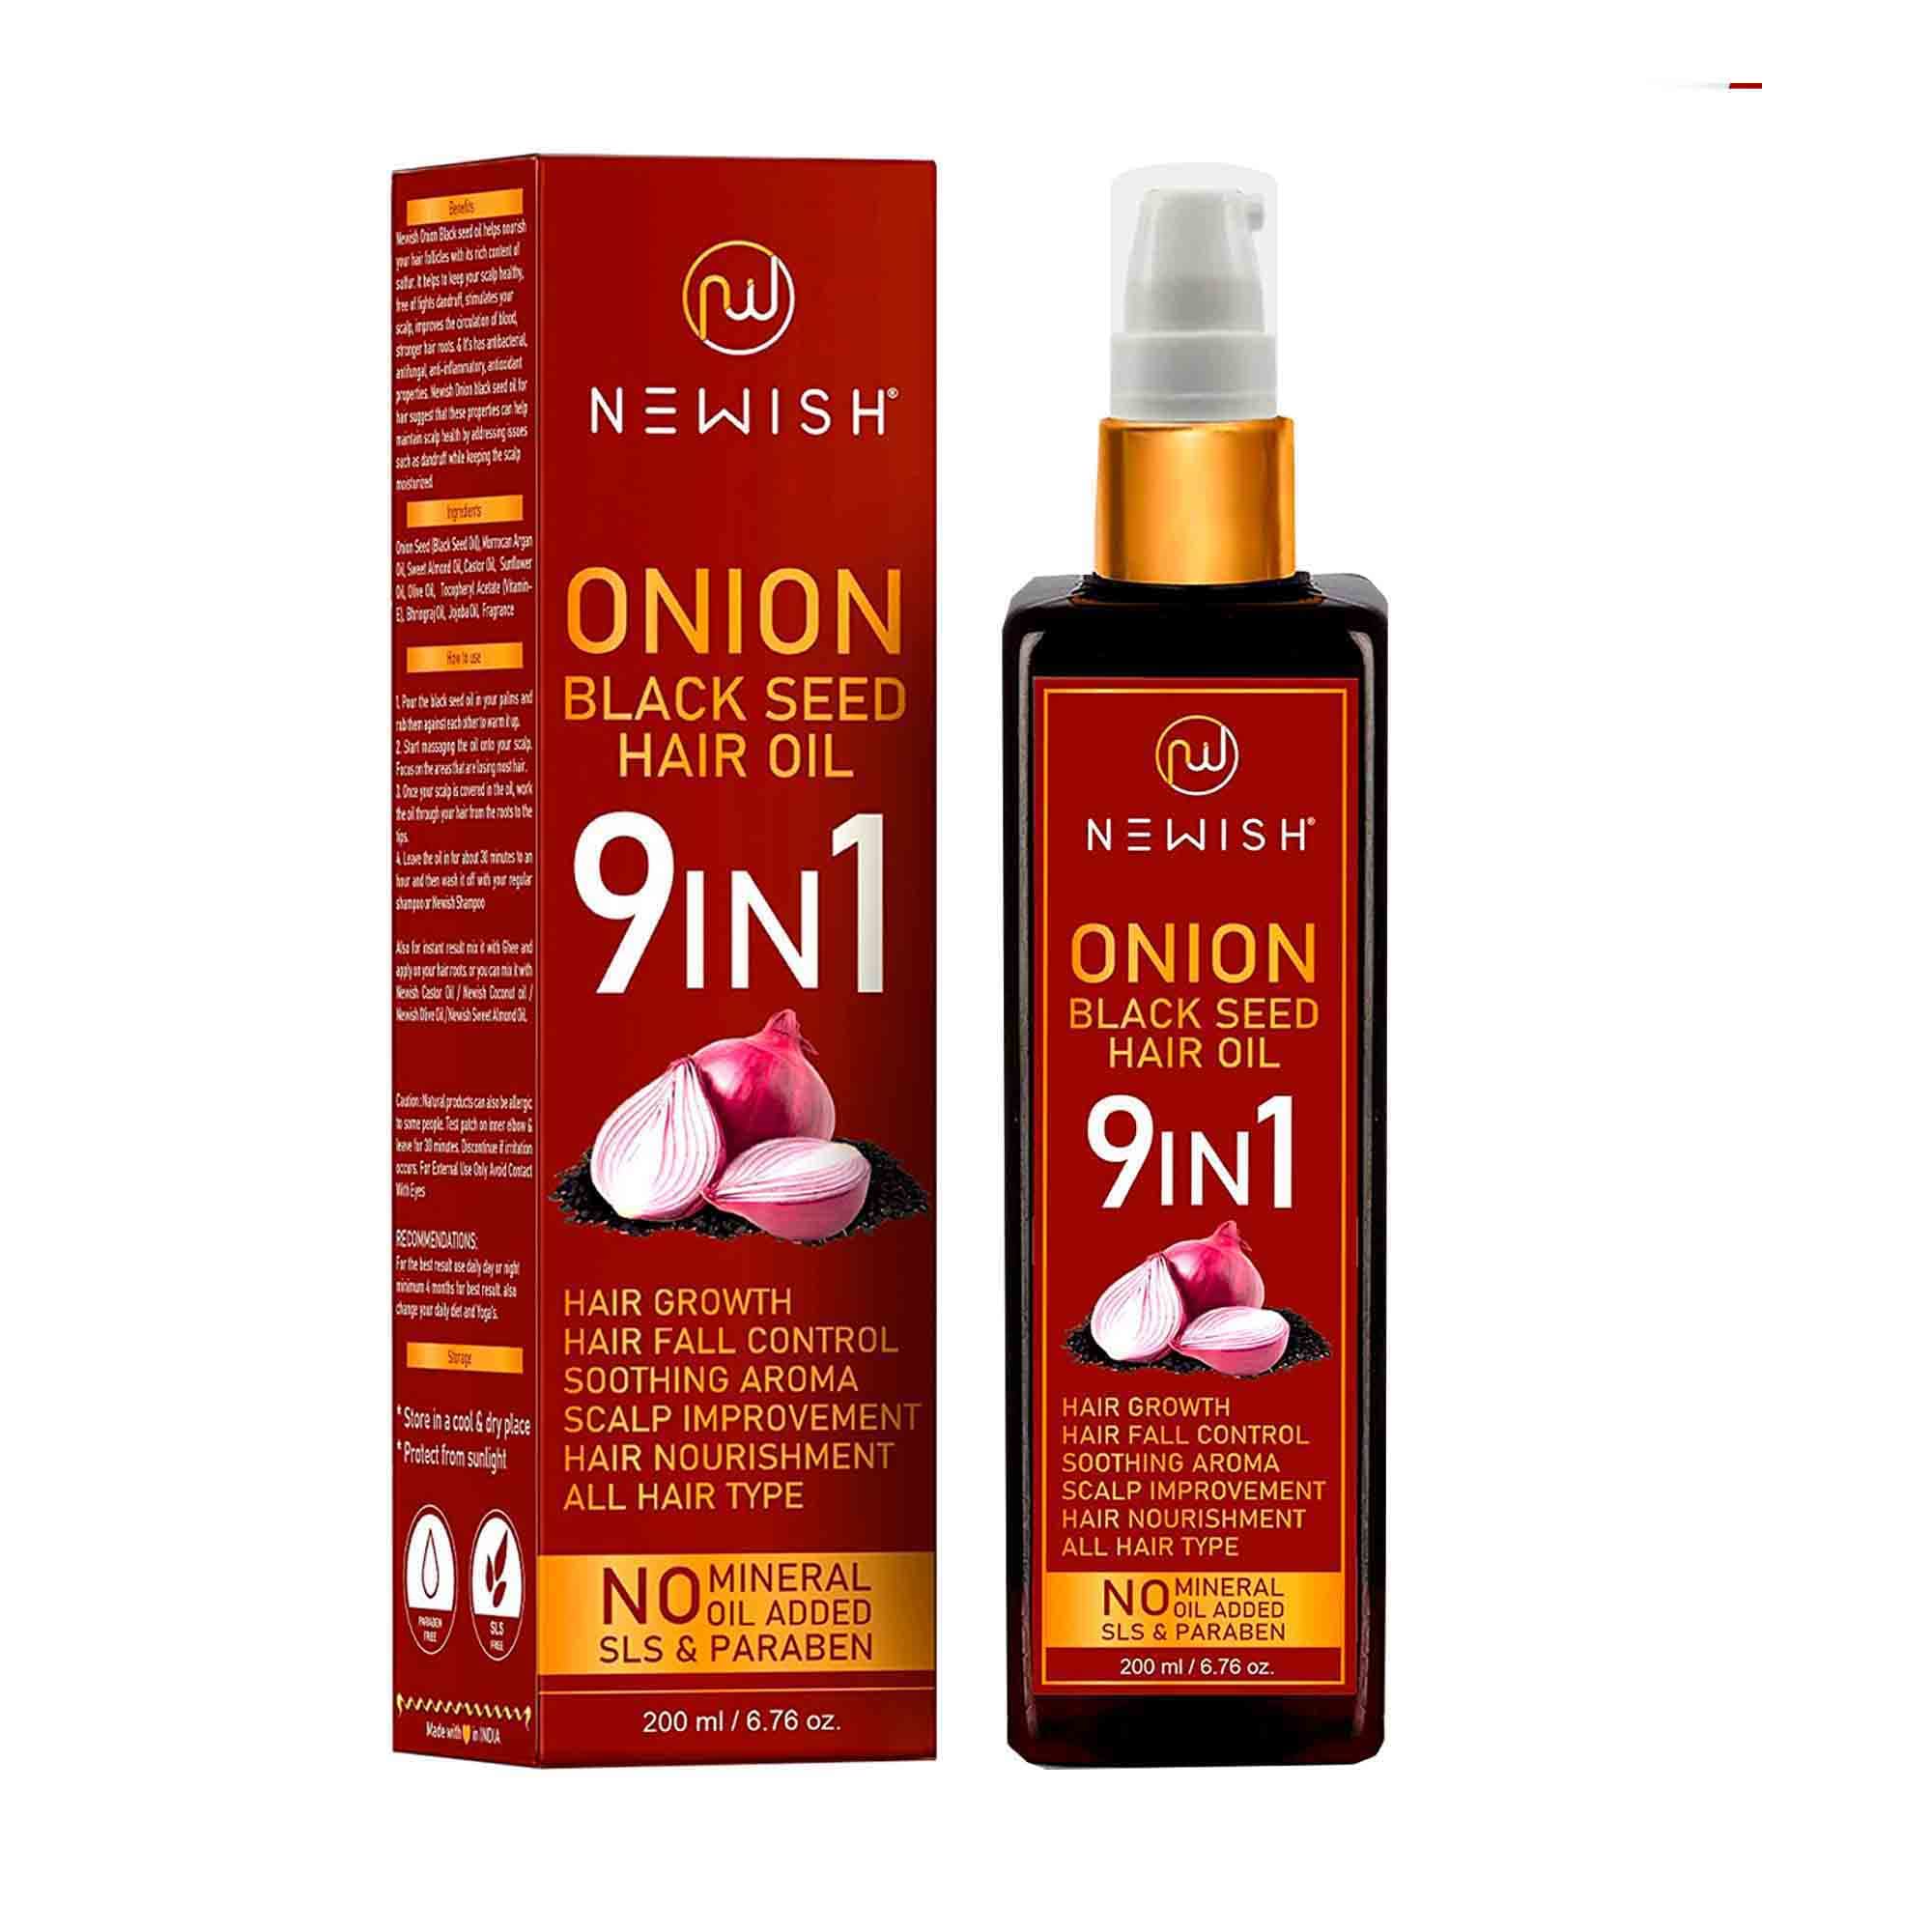 Newish Black Seed Onion oil for hair Regrowth for Hair Care and Growth, Including Castor Oil, Almond Oil, Sunflower Oil, Methi Oil & Jajoba Oil, for Shiny Hair 200 ml